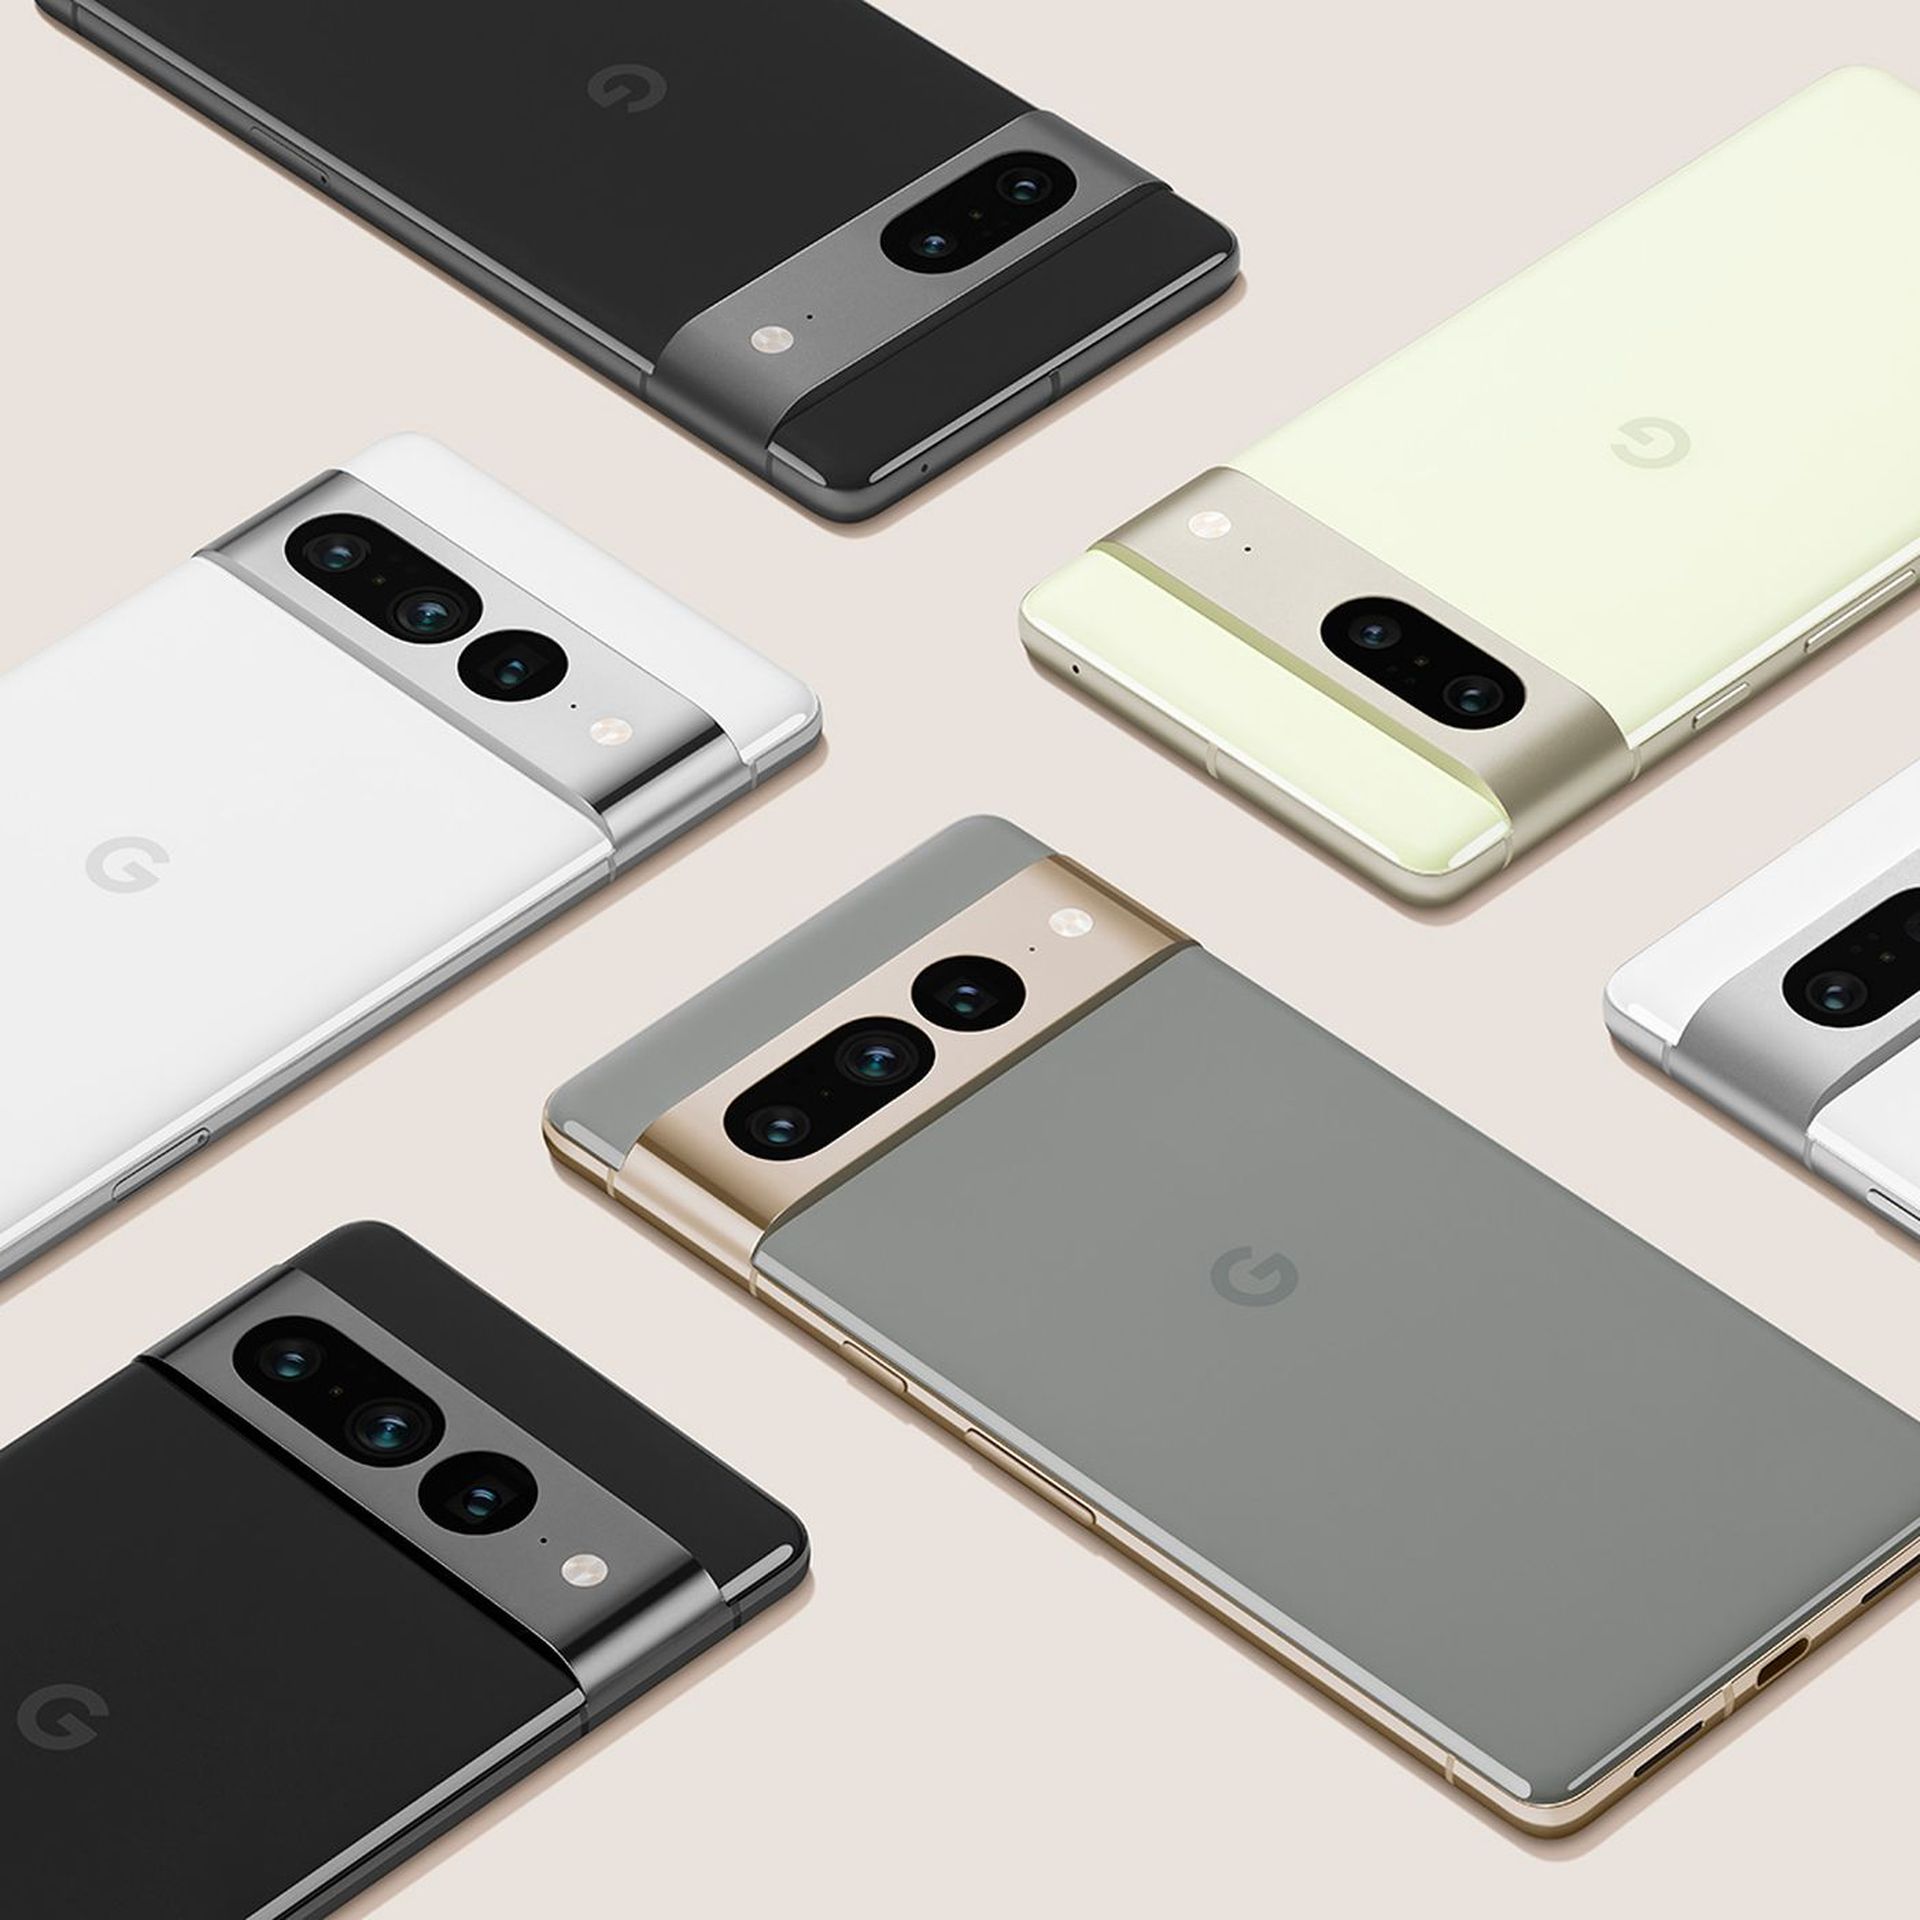 The Google Event Fall 2022 has just shown a slew of new Google gadgets, with a strong emphasis on intelligence and being useful to consumers. The new Pixel...